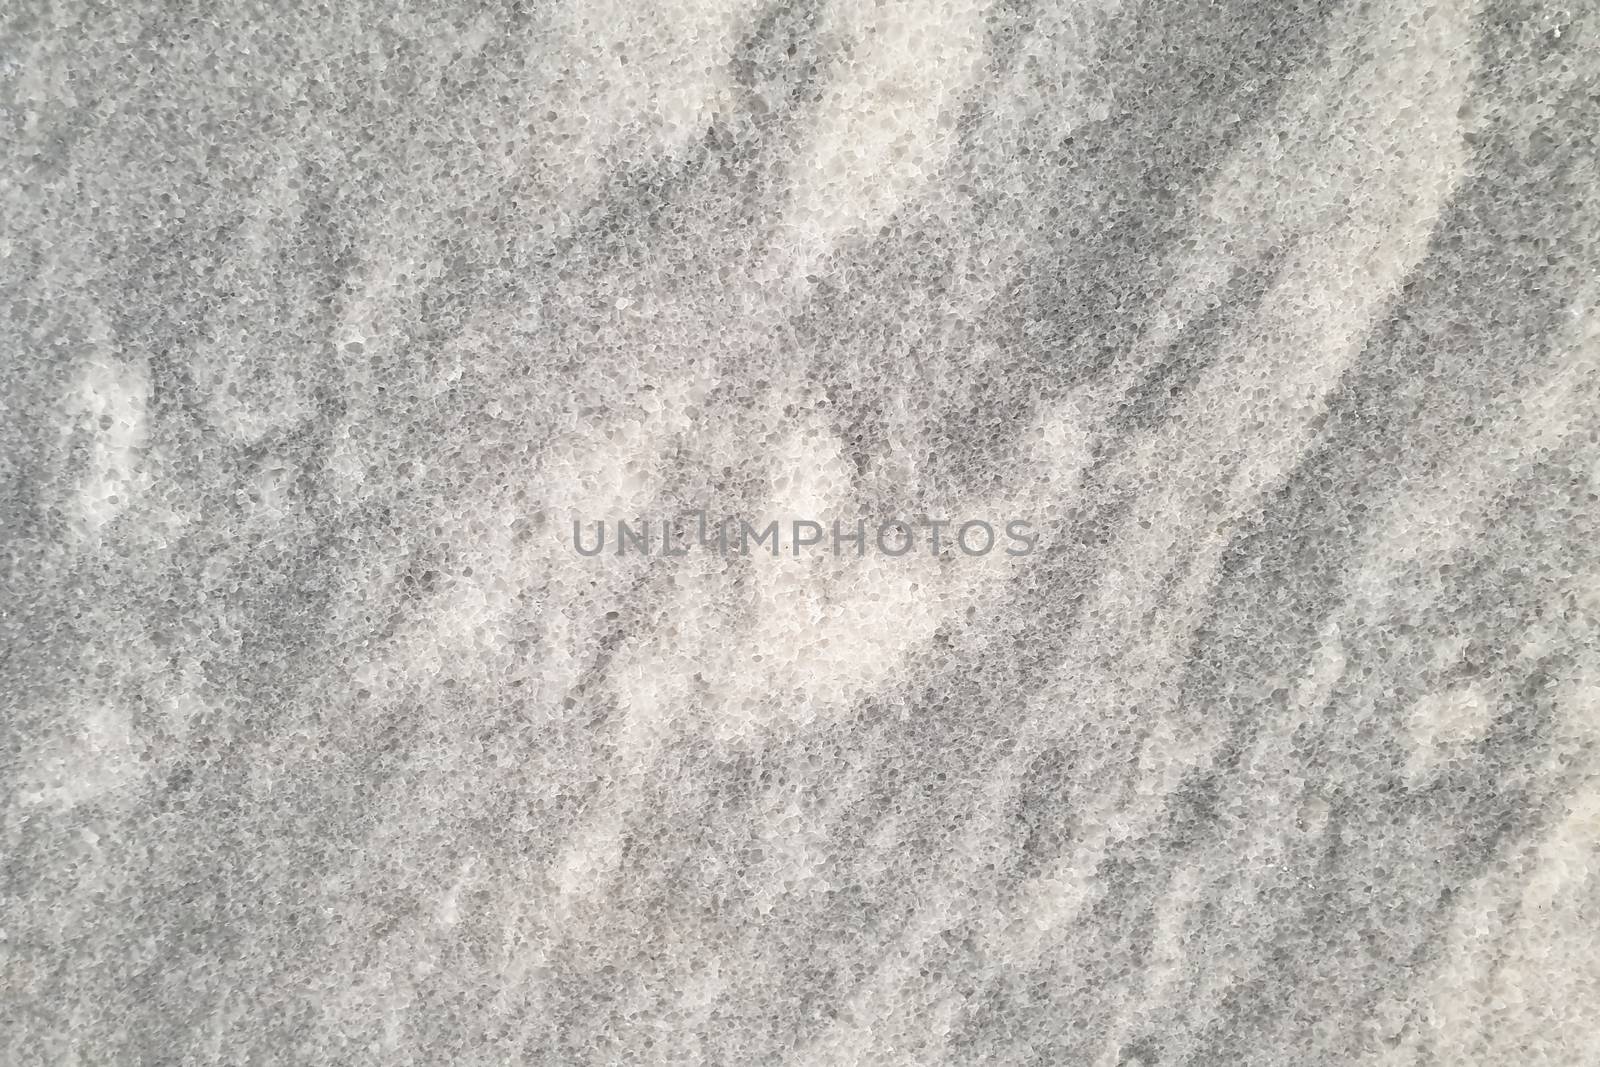 The stone texture of the gray concrete